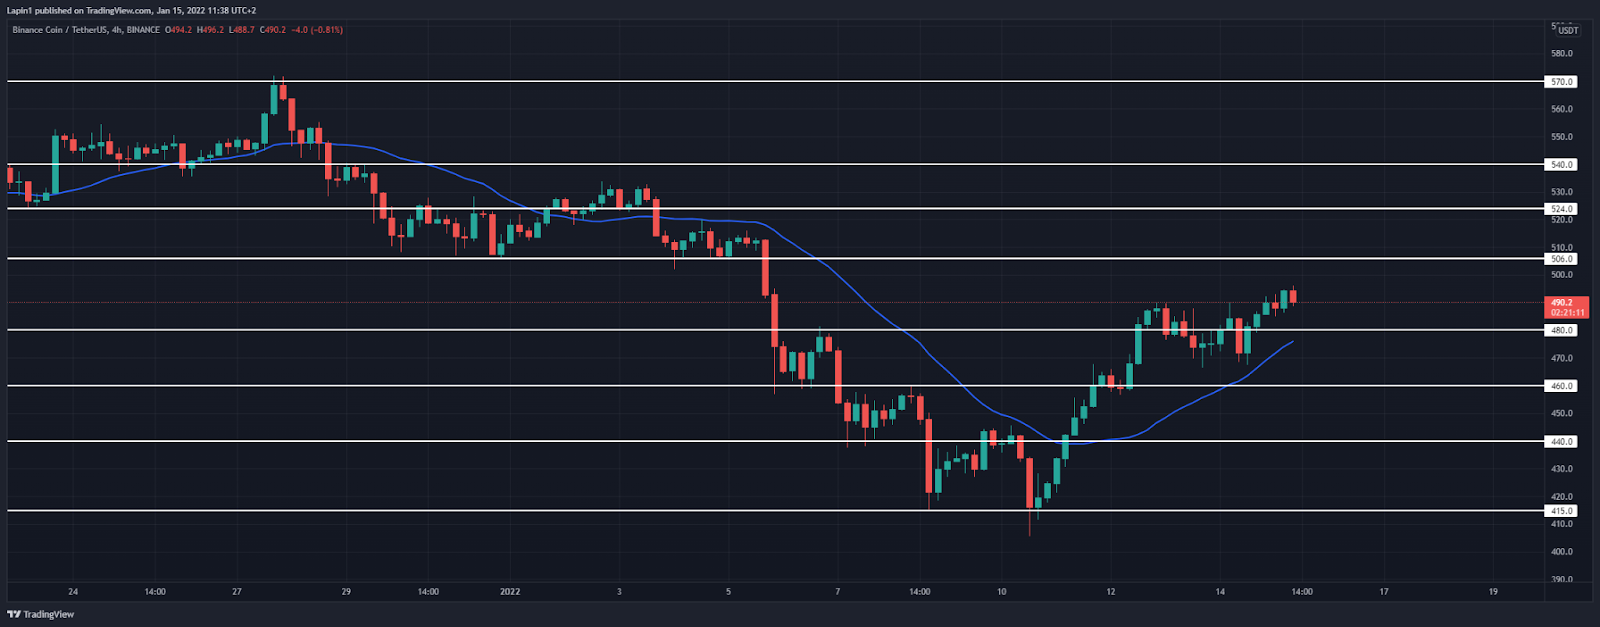 Binance Coin Price Analysis: BNB continues higher, tests $496